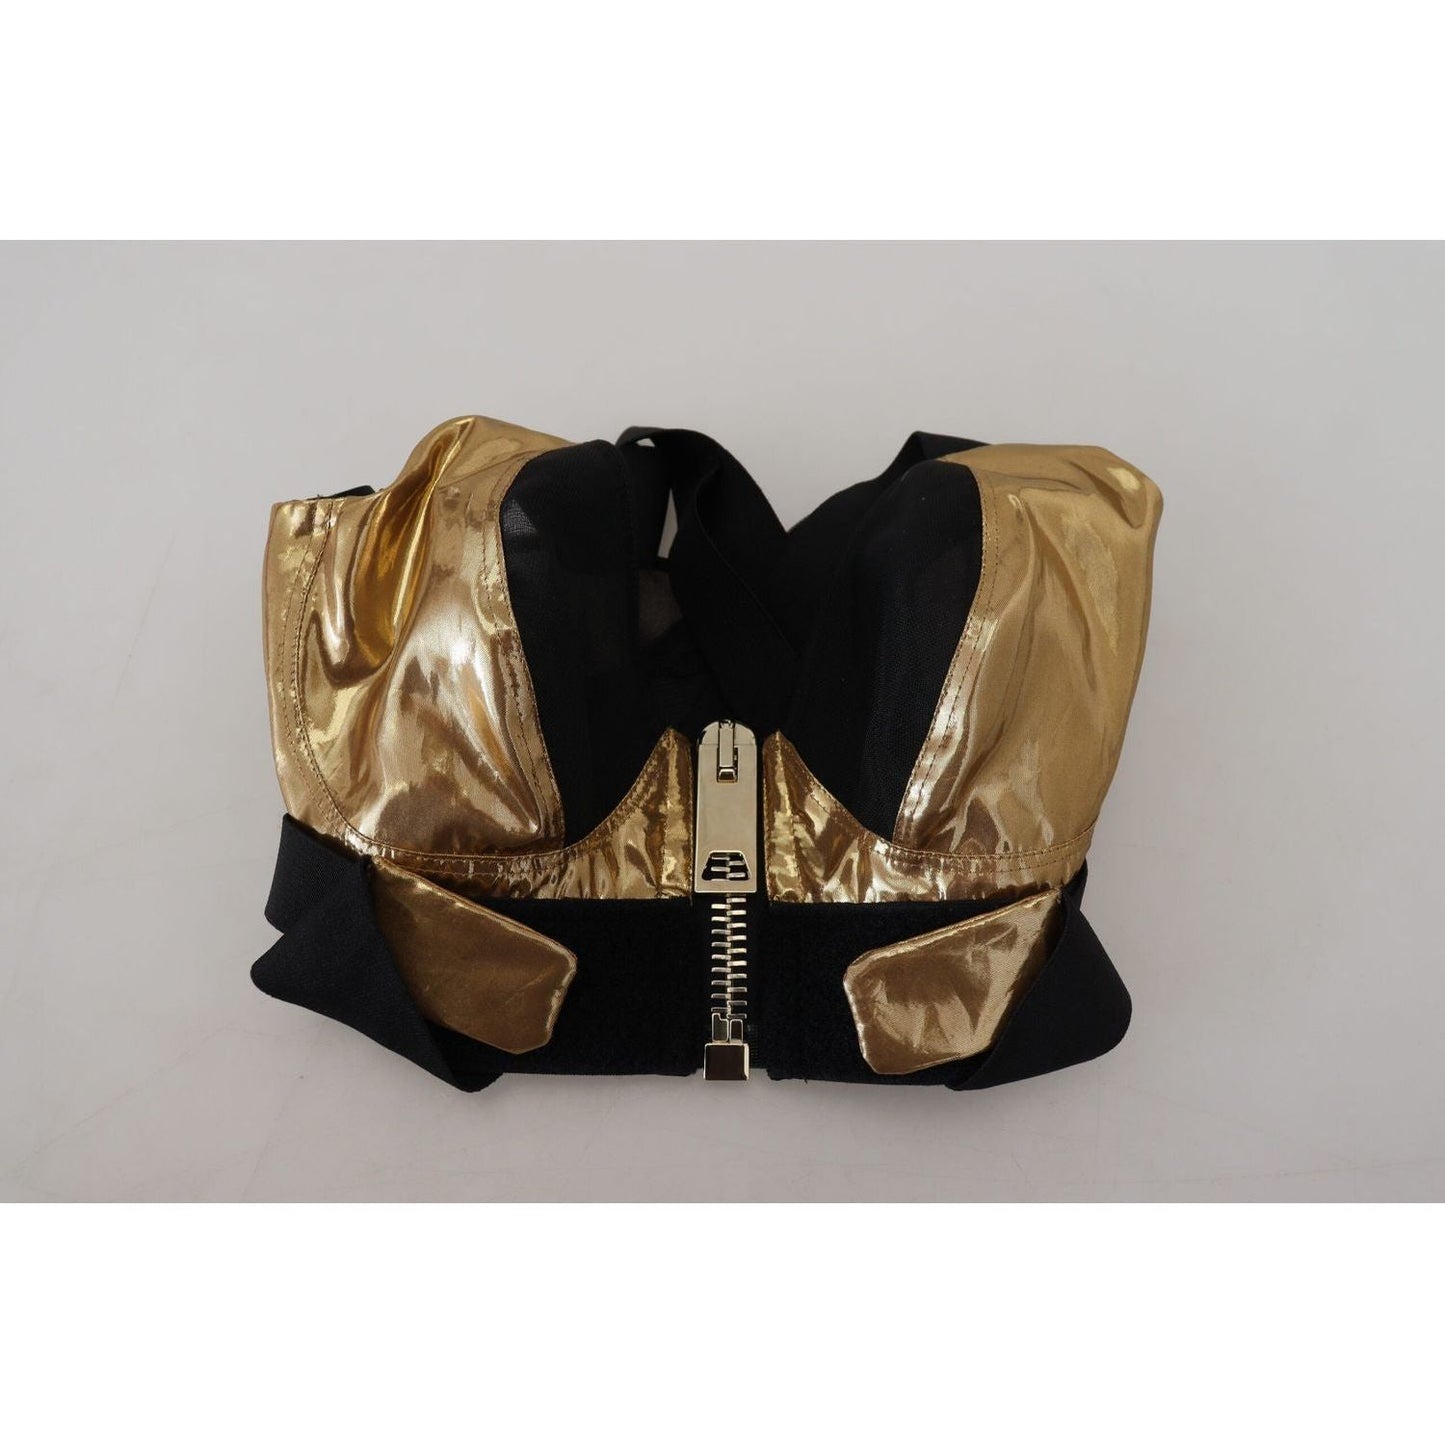 Dolce & Gabbana Elegant Cropped Top with Front Zipper black-gold-sleeveless-cropped-bustier-top